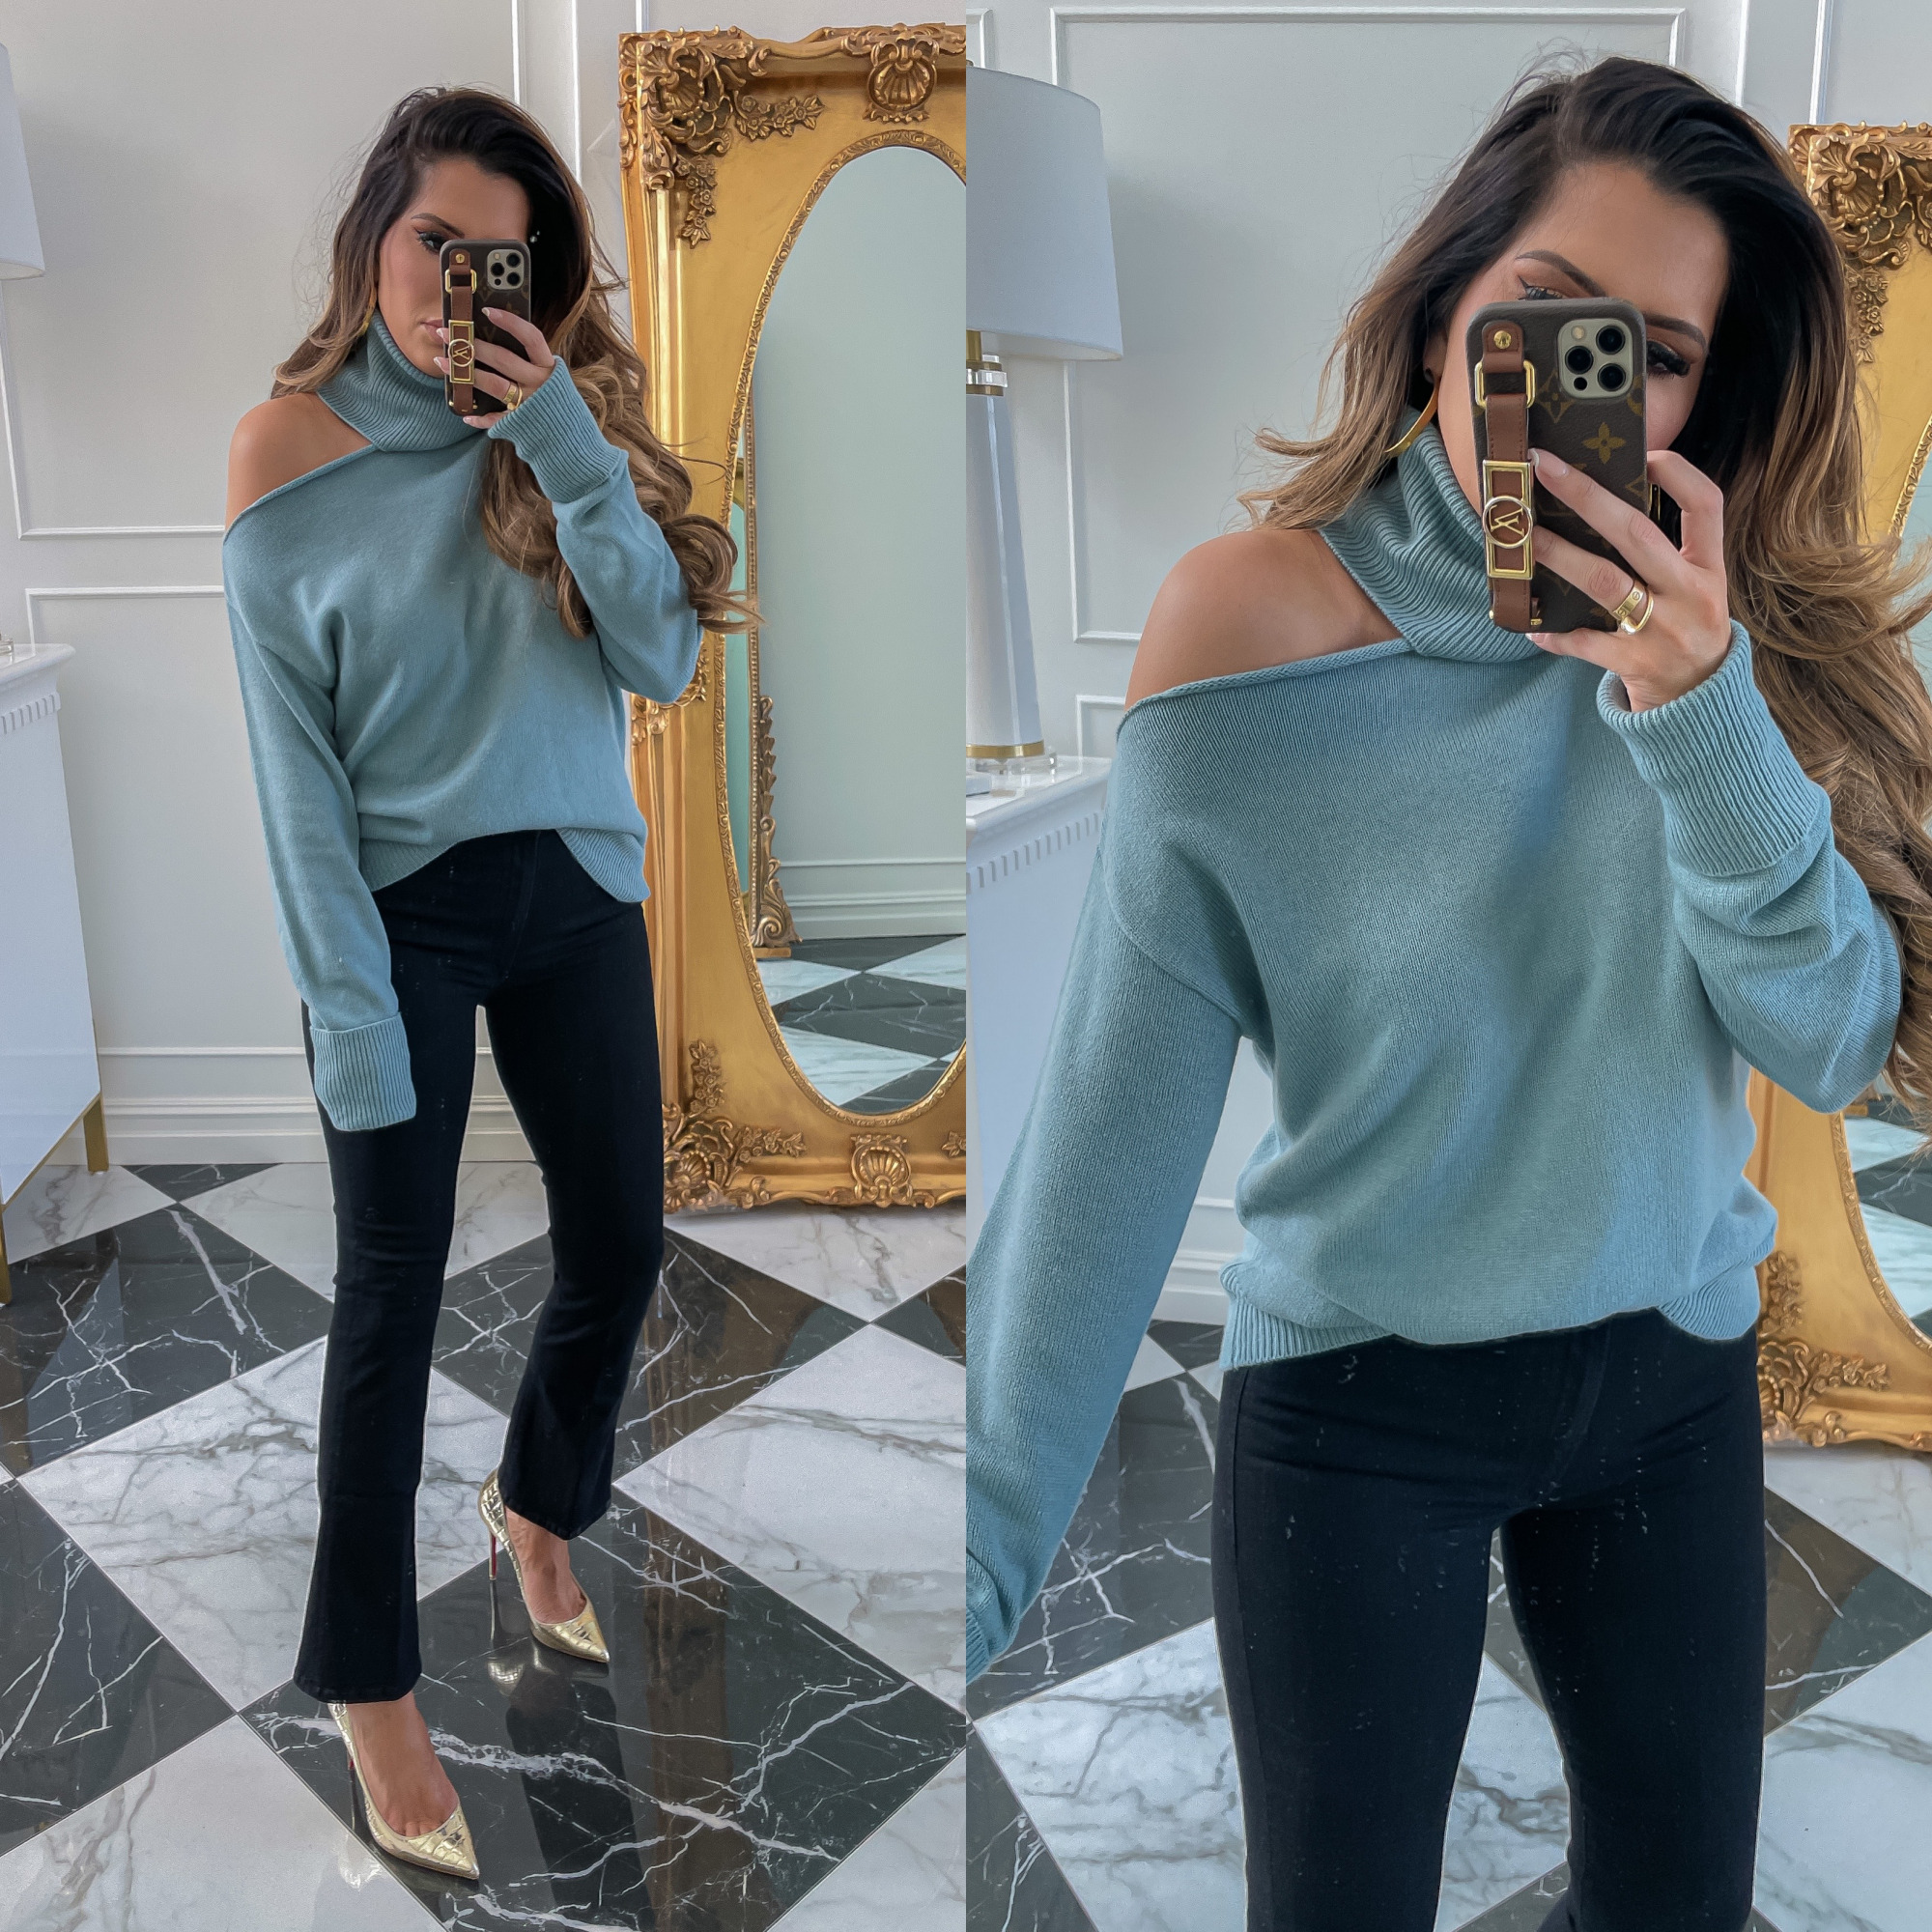 dstrom Anniversary Sale 2021 Picks, best of NSALE 2021 mother jeans, Nordstrom sale must haves blog post, Emily gemma7 \ Nordstrom Anniversary Sale US fashion blog, The Sweetest Thing: image of Emily Gemma wearing a Nordstrom cold shoulder turtleneck sweater, dark wash denim, and gold stilettos. 